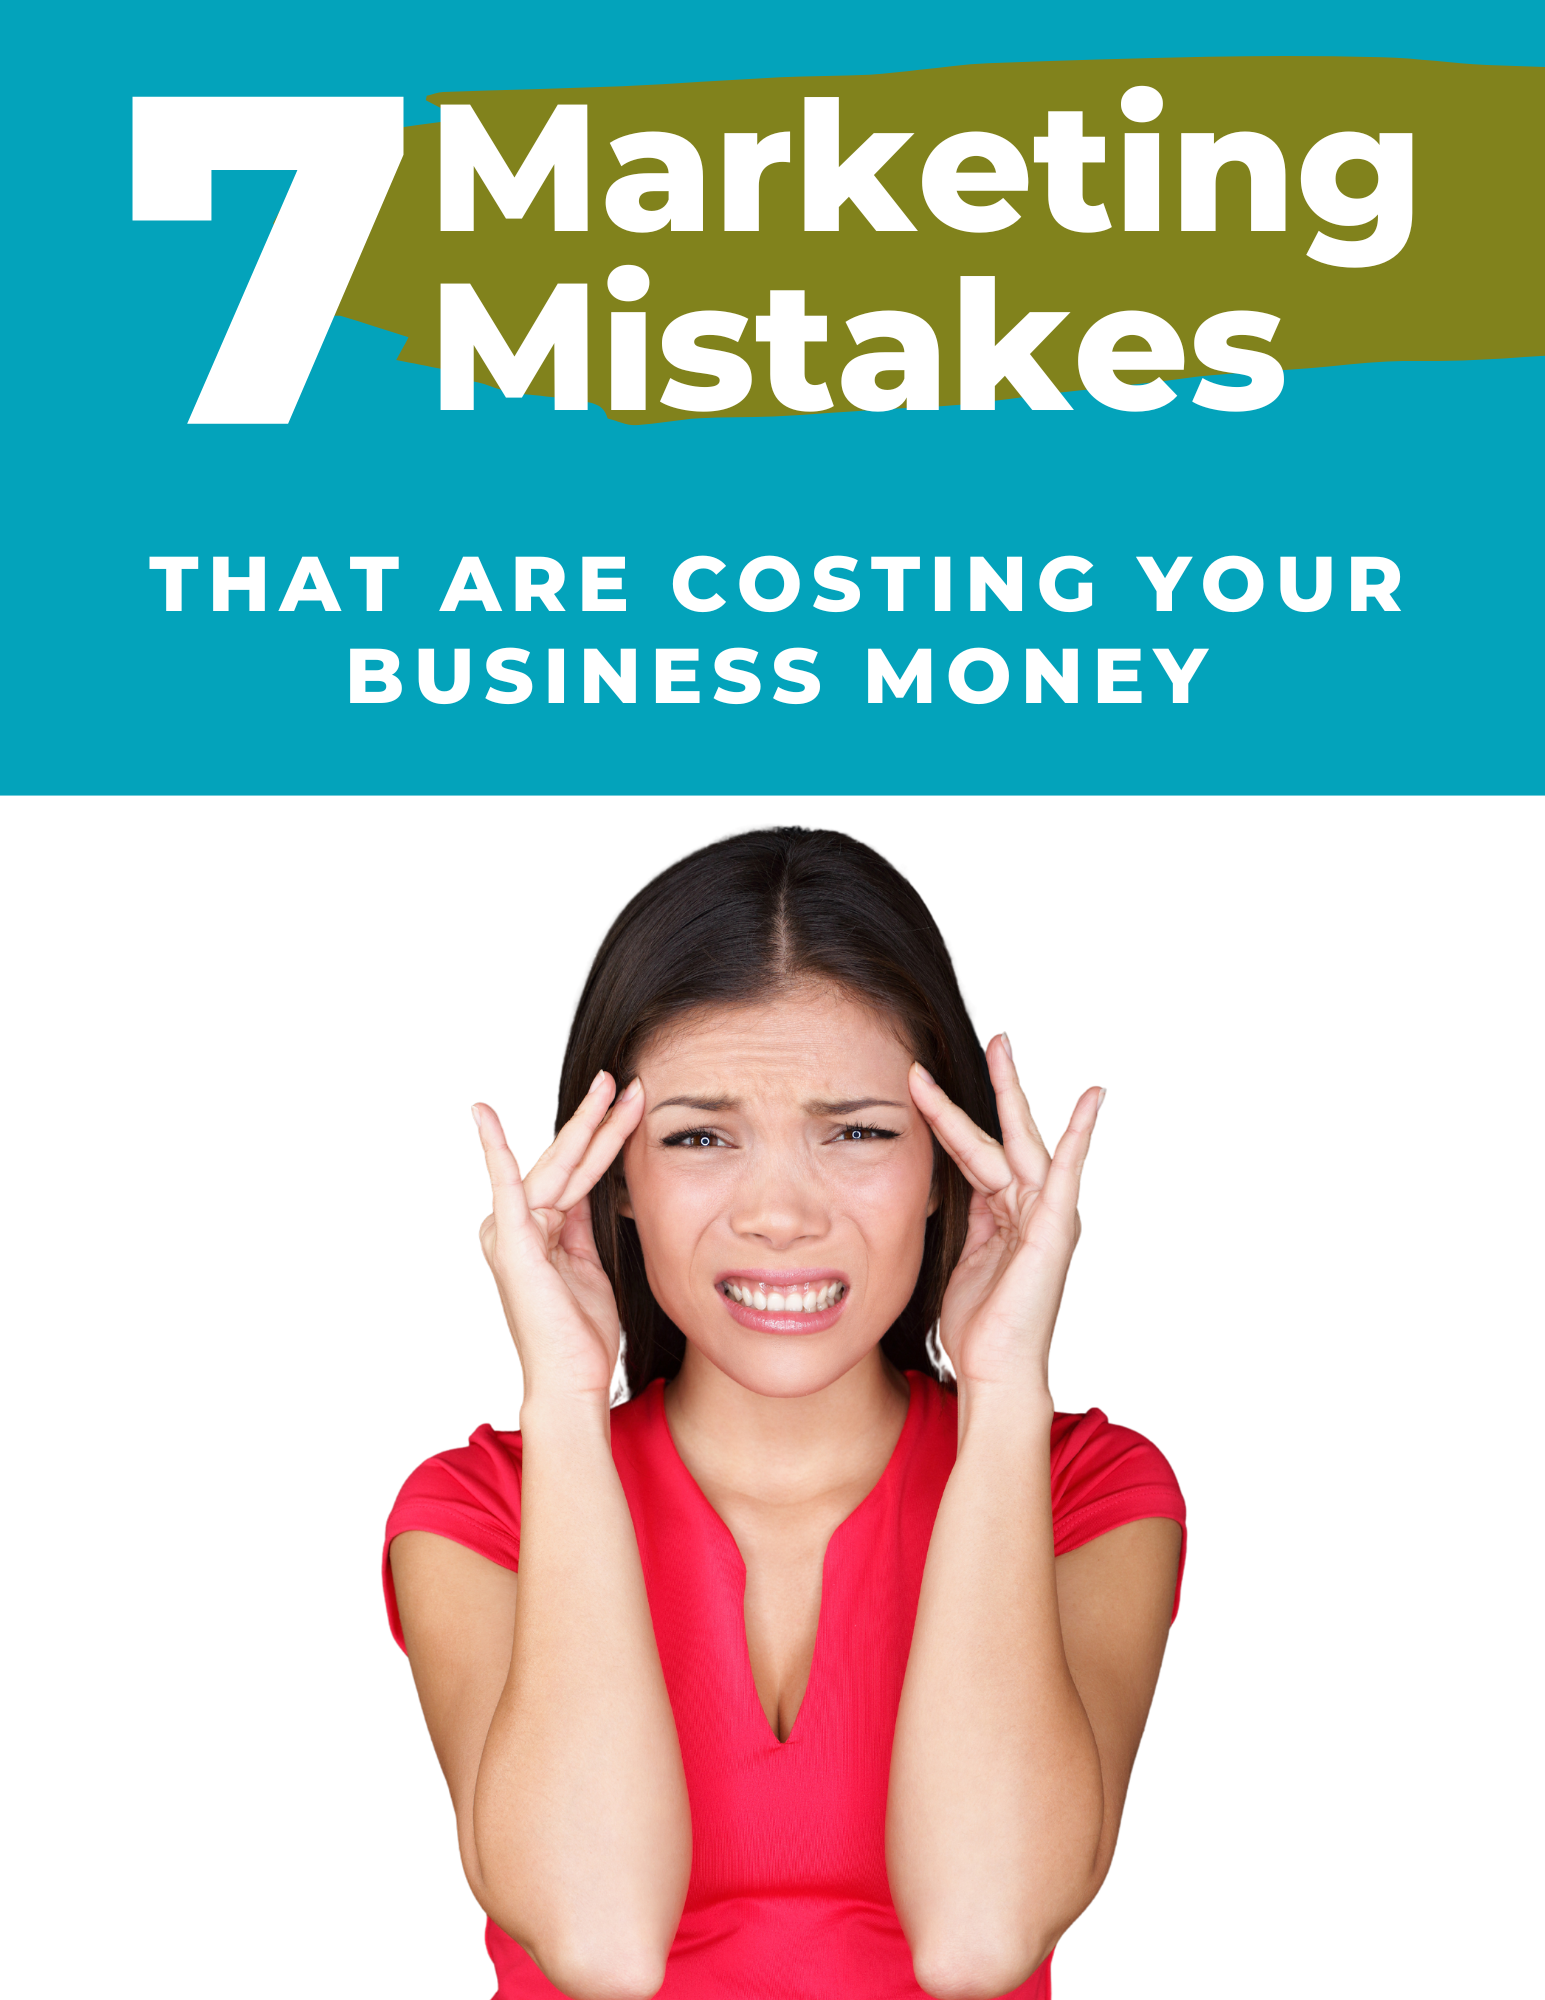 Lead Generator - 7 Marketing Mistakes That Are Costing your Business Money 